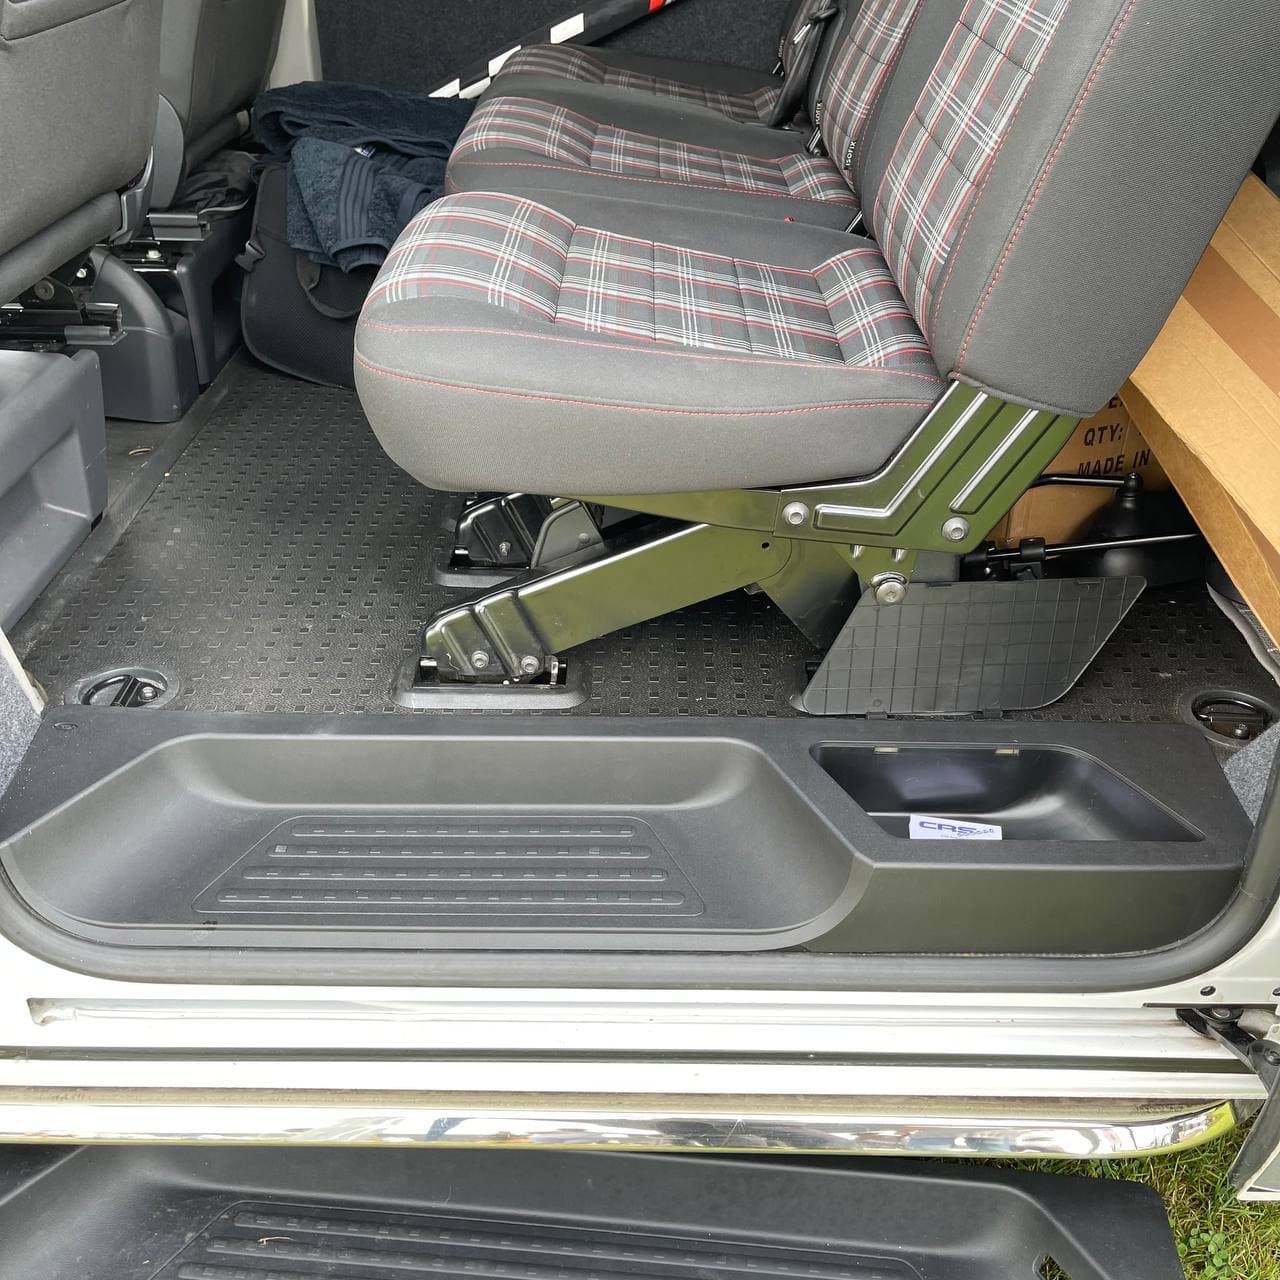 VW T5, T5.1 Transporter Side Loading Door Step V3 17mm Extra Deep with Storage Compartment